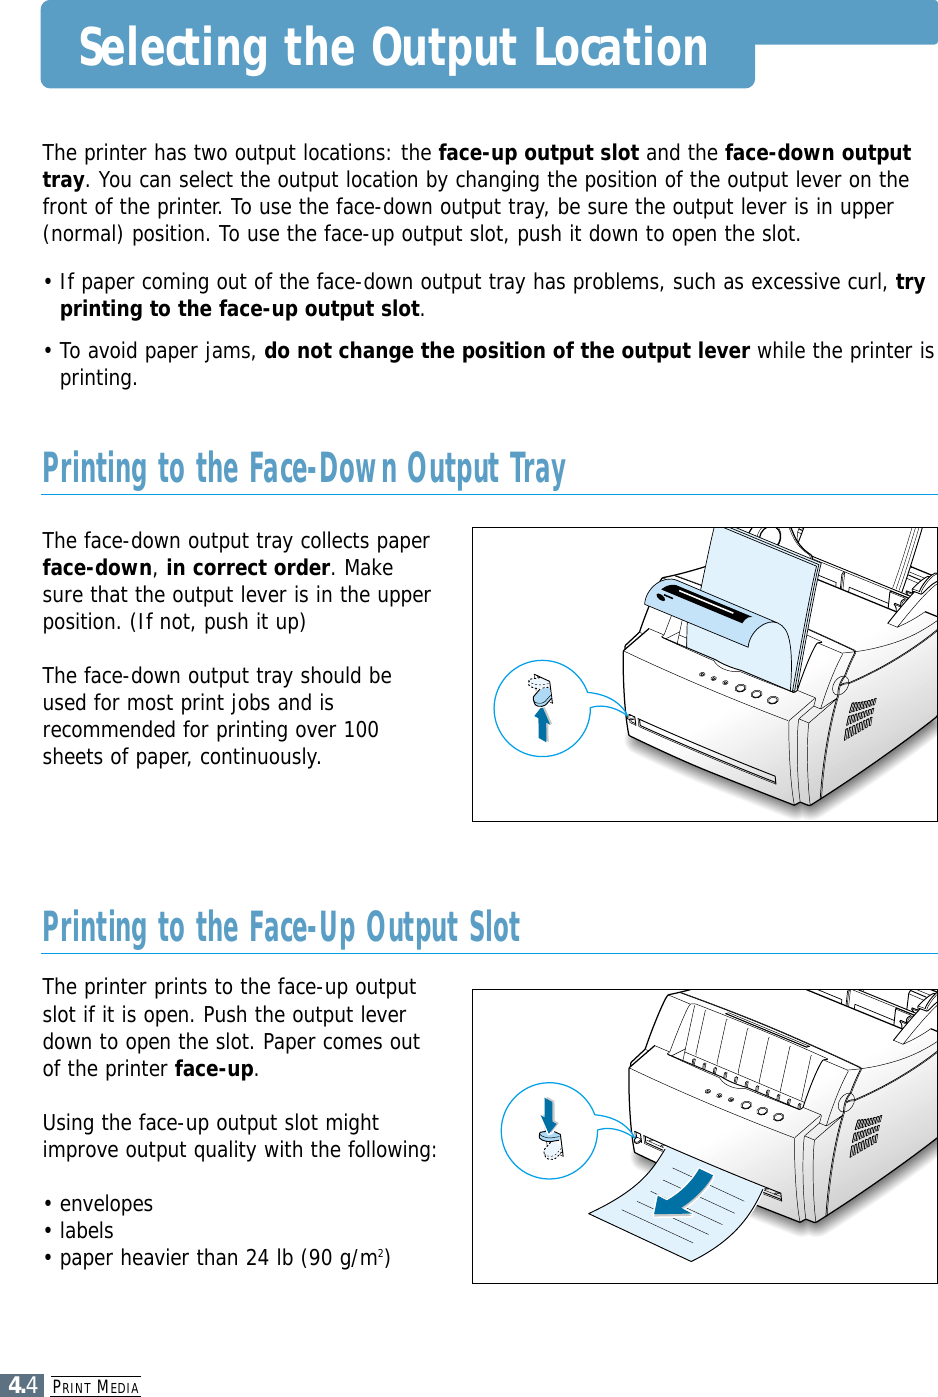 PRINT MEDIA4.4Selecting the Output LocationThe printer has two output locations: the face-up output slot and the face-down outputtray. You can select the output location by changing the position of the output lever on thefront of the printer. To use the face-down output tray, be sure the output lever is in upper(normal) position. To use the face-up output slot, push it down to open the slot.• If paper coming out of the face-down output tray has problems, such as excessive curl, tryprinting to the face-up output slot.• To avoid paper jams, do not change the position of the output lever while the printer isprinting.The face-down output tray collects paperface-down, in correct order. Makesure that the output lever is in the upperposition. (If not, push it up)The face-down output tray should beused for most print jobs and isrecommended for printing over 100sheets of paper, continuously.The printer prints to the face-up outputslot if it is open. Push the output leverdown to open the slot. Paper comes outof the printer face-up.Using the face-up output slot mightimprove output quality with the following:• envelopes• labels• paper heavier than 24 lb (90 g/m2)Printing to the Face-Down Output TrayPrinting to the Face-Up Output Slot